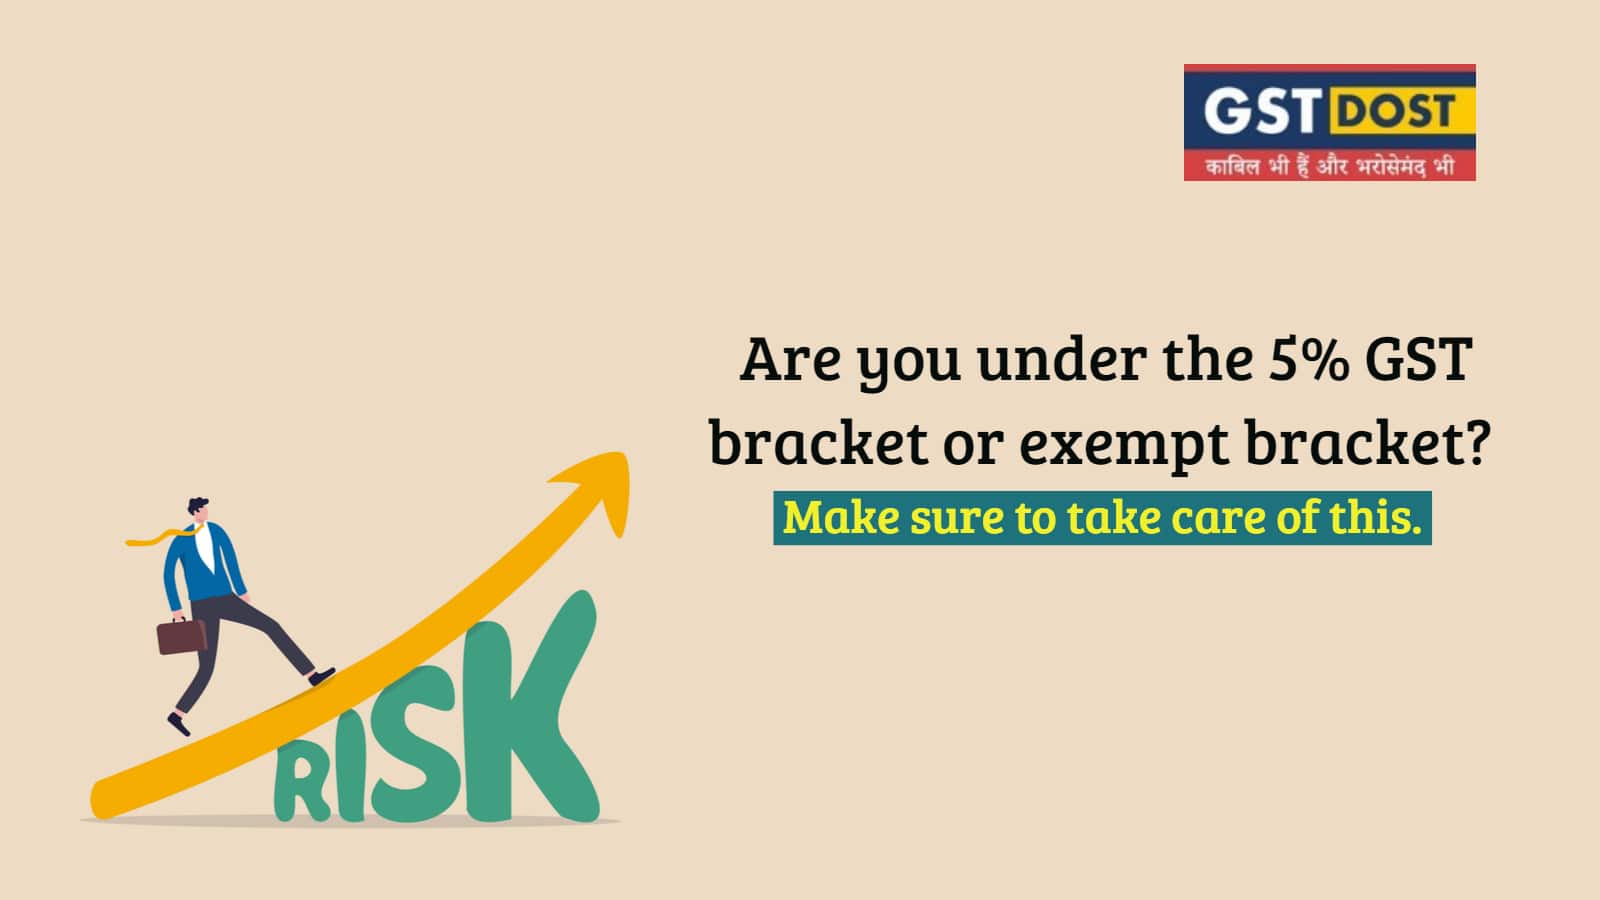 Are you under the 5% GST bracket or exempt bracket? Make sure to take care of this